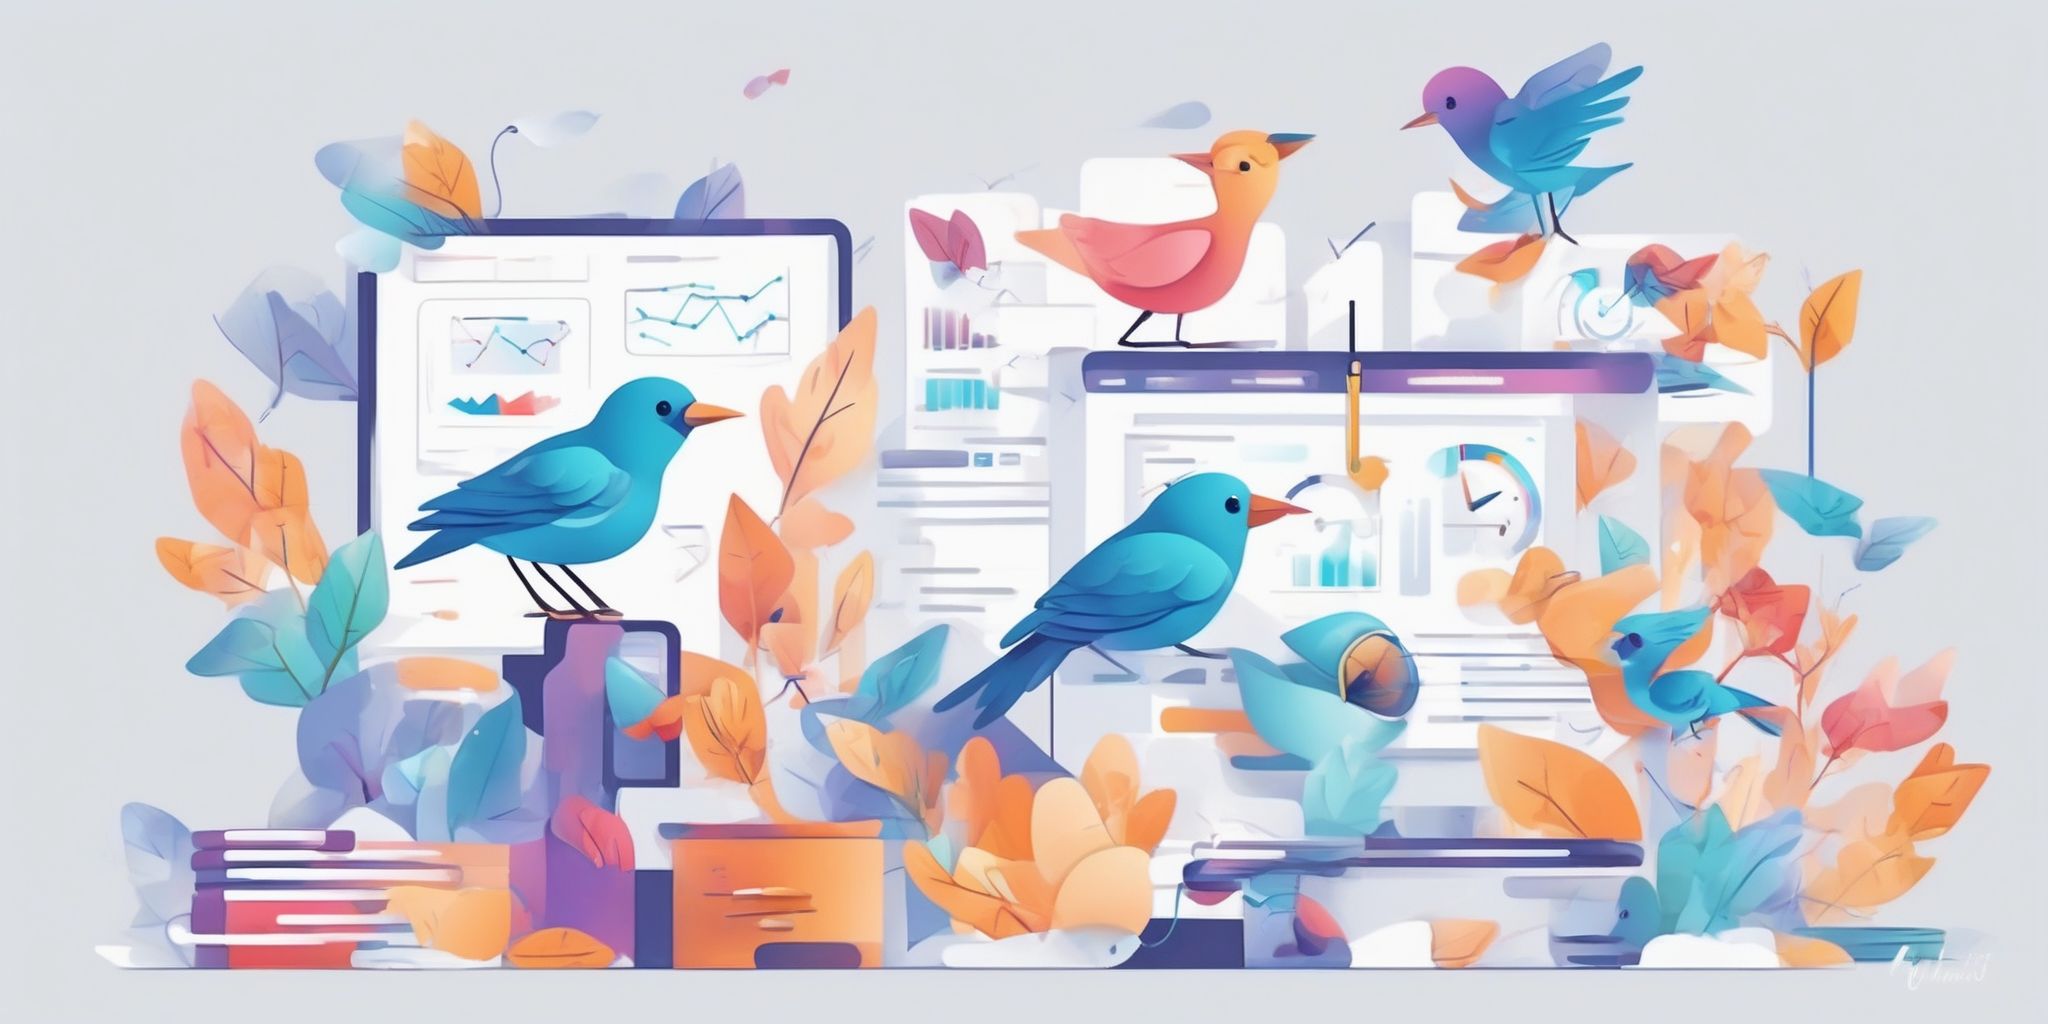 Tweet audit in illustration style with gradients and white background